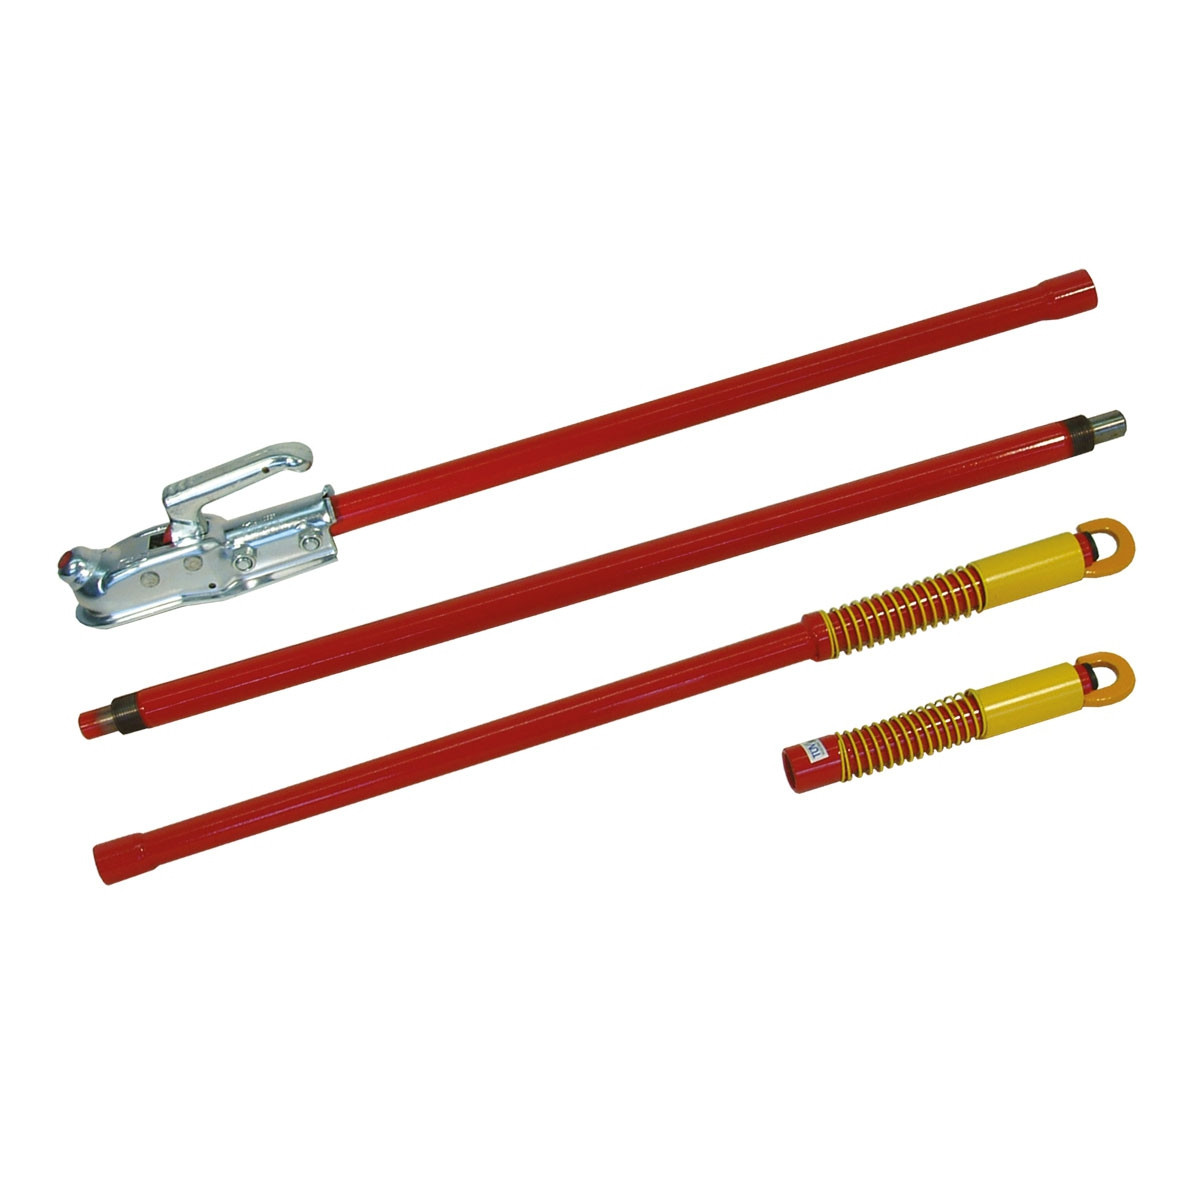 Prolux Tow Pole for up to 3500kg